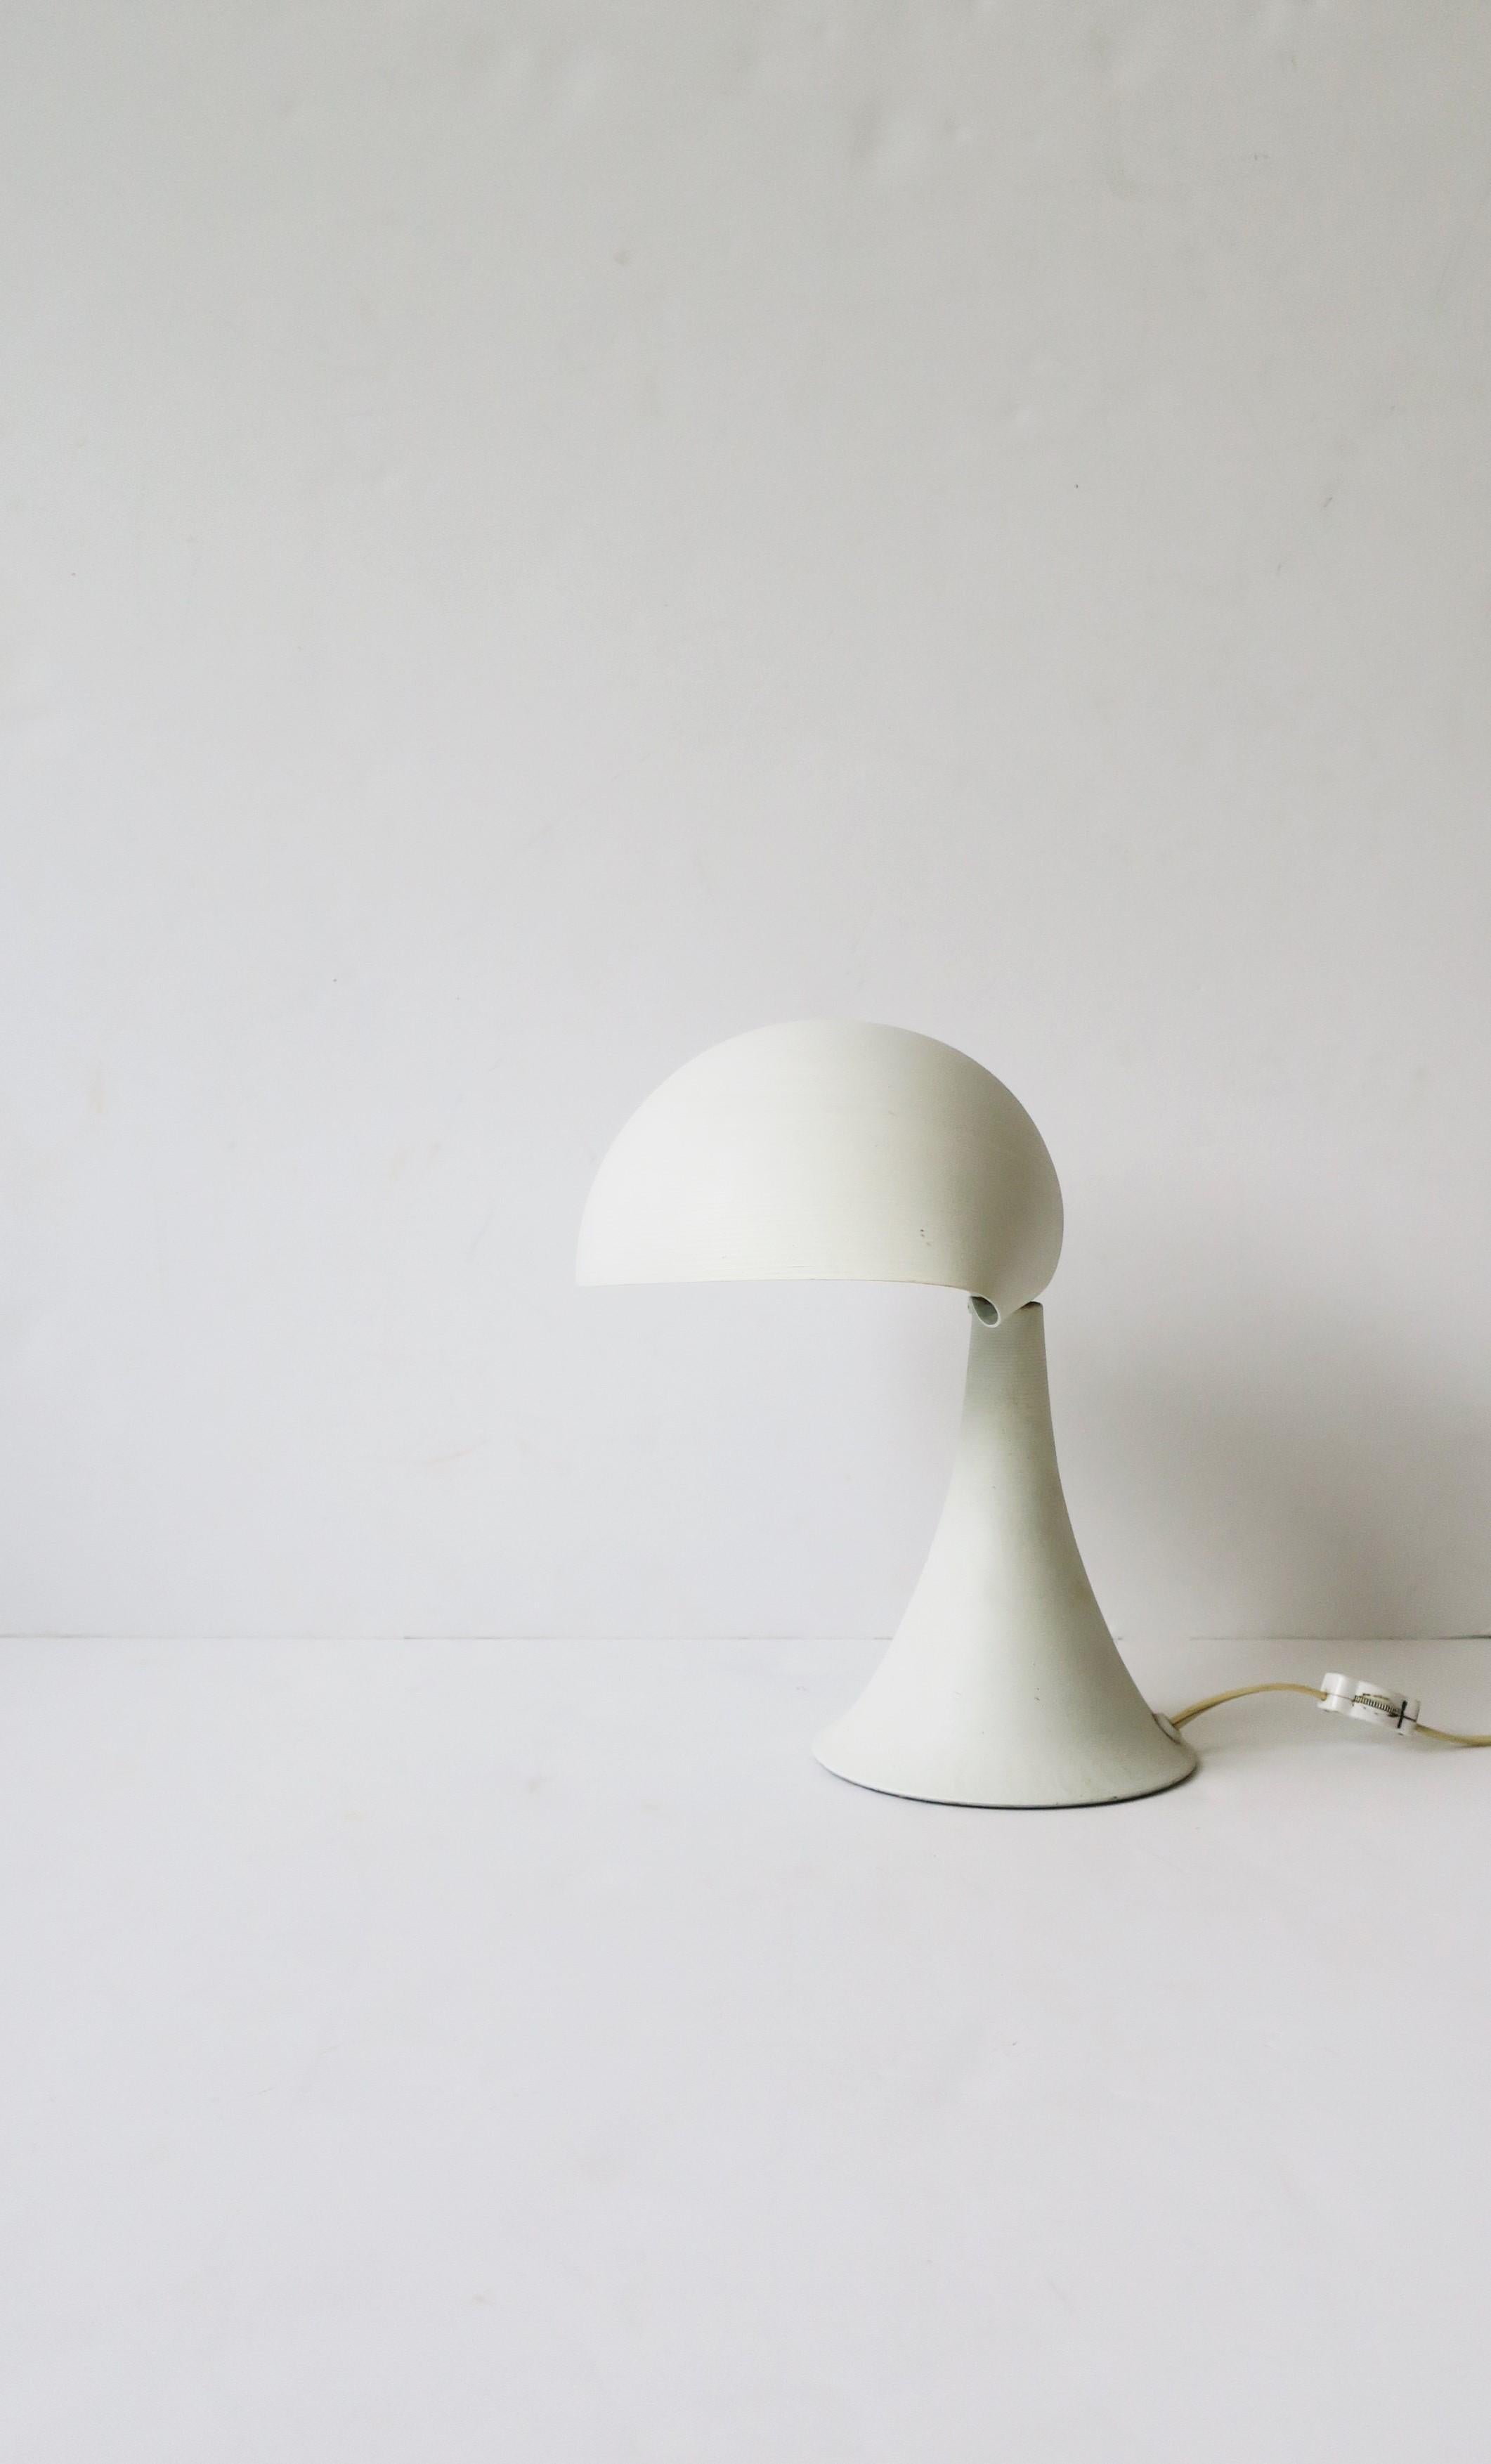 A beautiful modern or Midcentury Modern period white desk or table lamp, circa mid-20th century, 1960s. Lamp is aluminum with matte white surface. A great lamp for an office desk or nightstand table, etc. Two-way switch on cord close to back of lamp